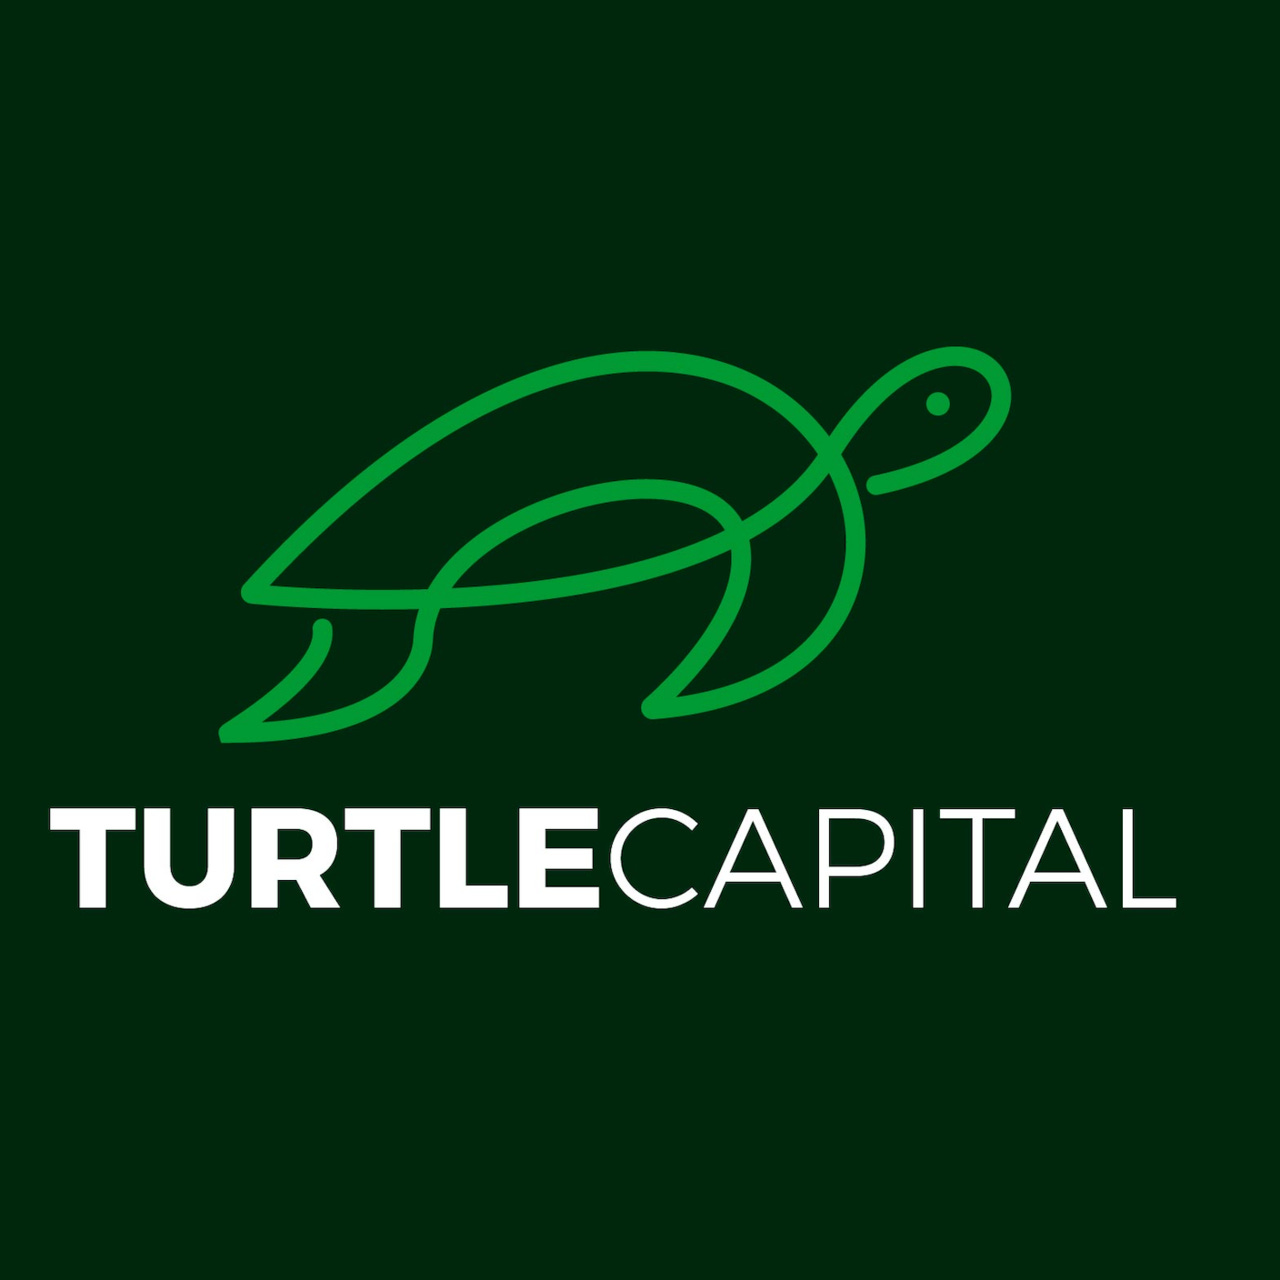 Artwork for Turtle Capital by Adrià Rivero